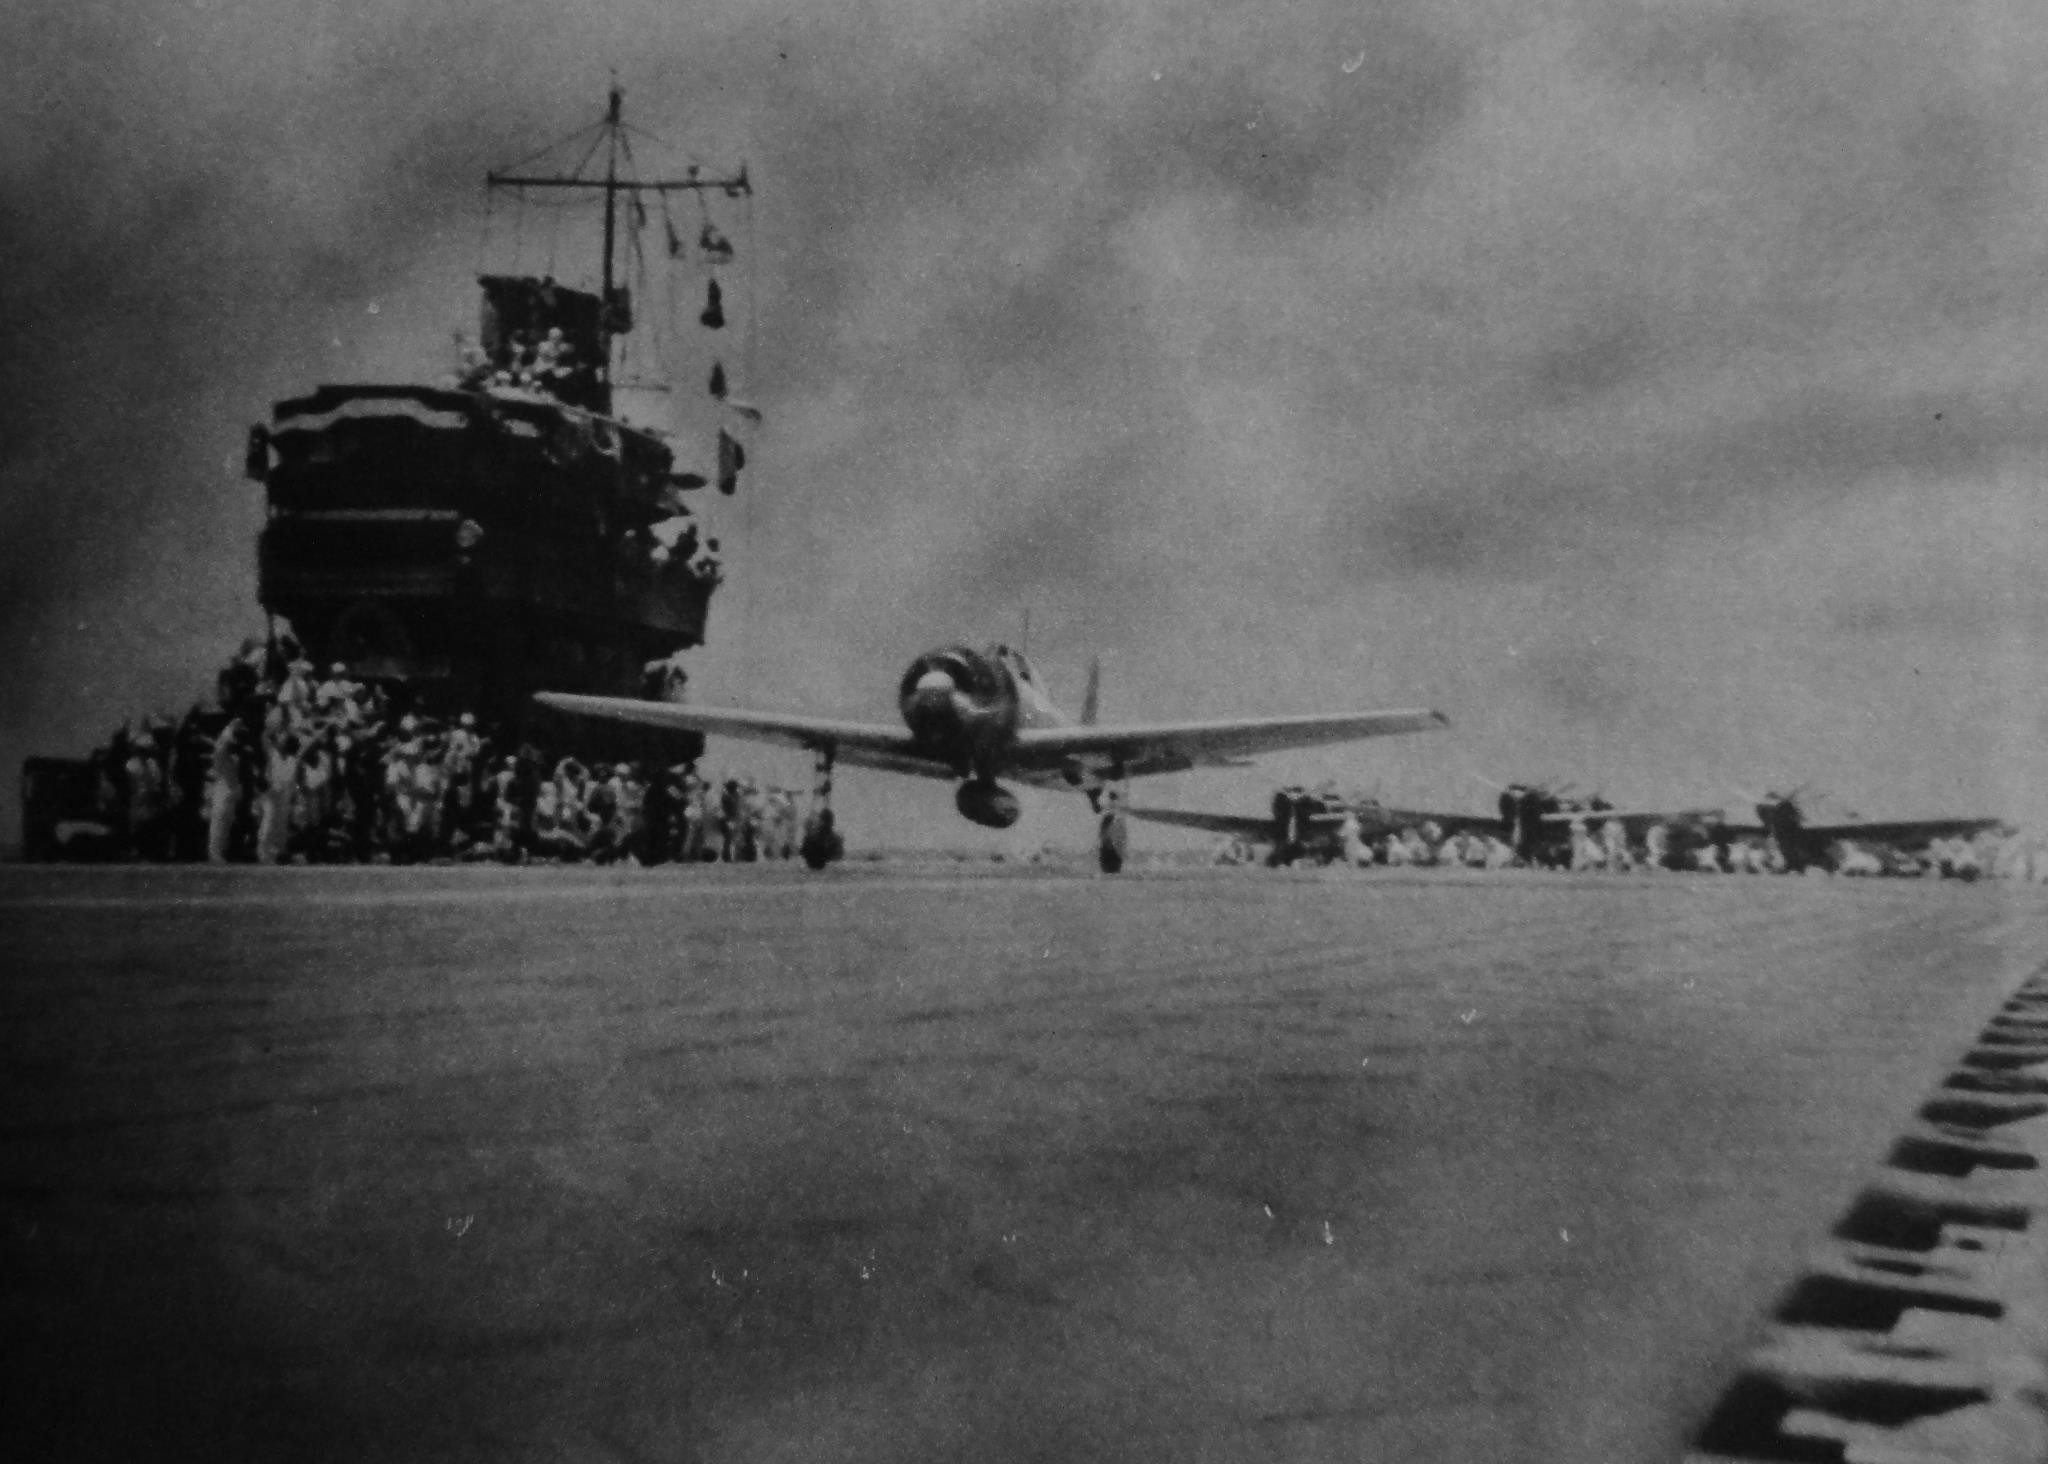 A6M Zero fighter taking off from a carrier, possibly Shokaku, 1941-1943